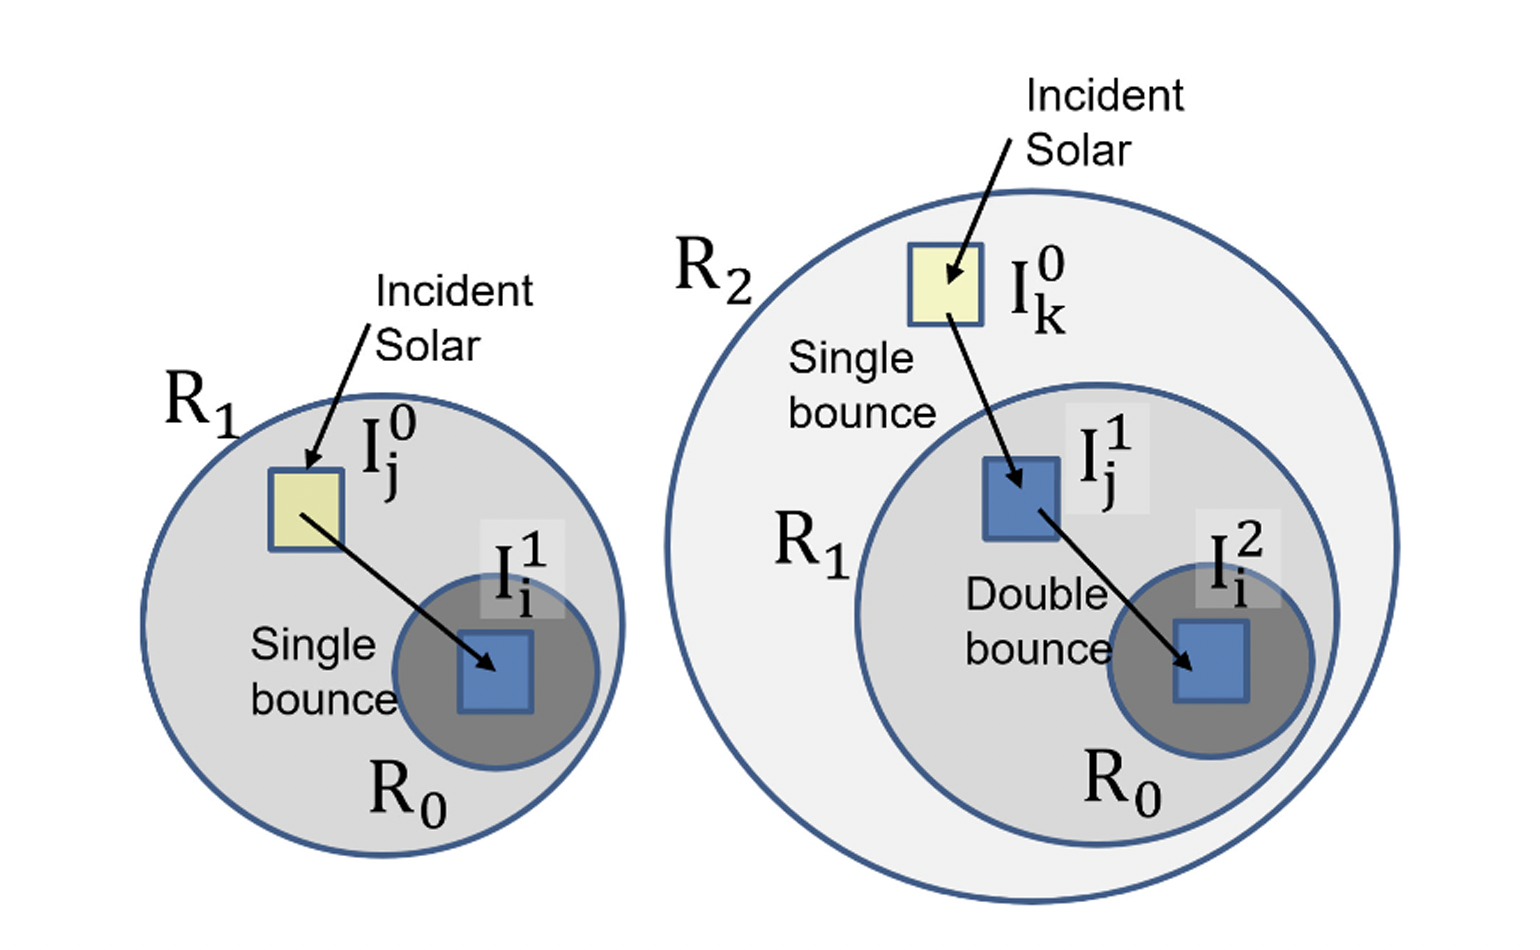 The schematic detailing single and double bounce scenarios is elaborated upon in sections (B) and (C). It is important to note that for irradiance \(I\), the superscript denotes the bounce number, while the subscript identifies the facet.